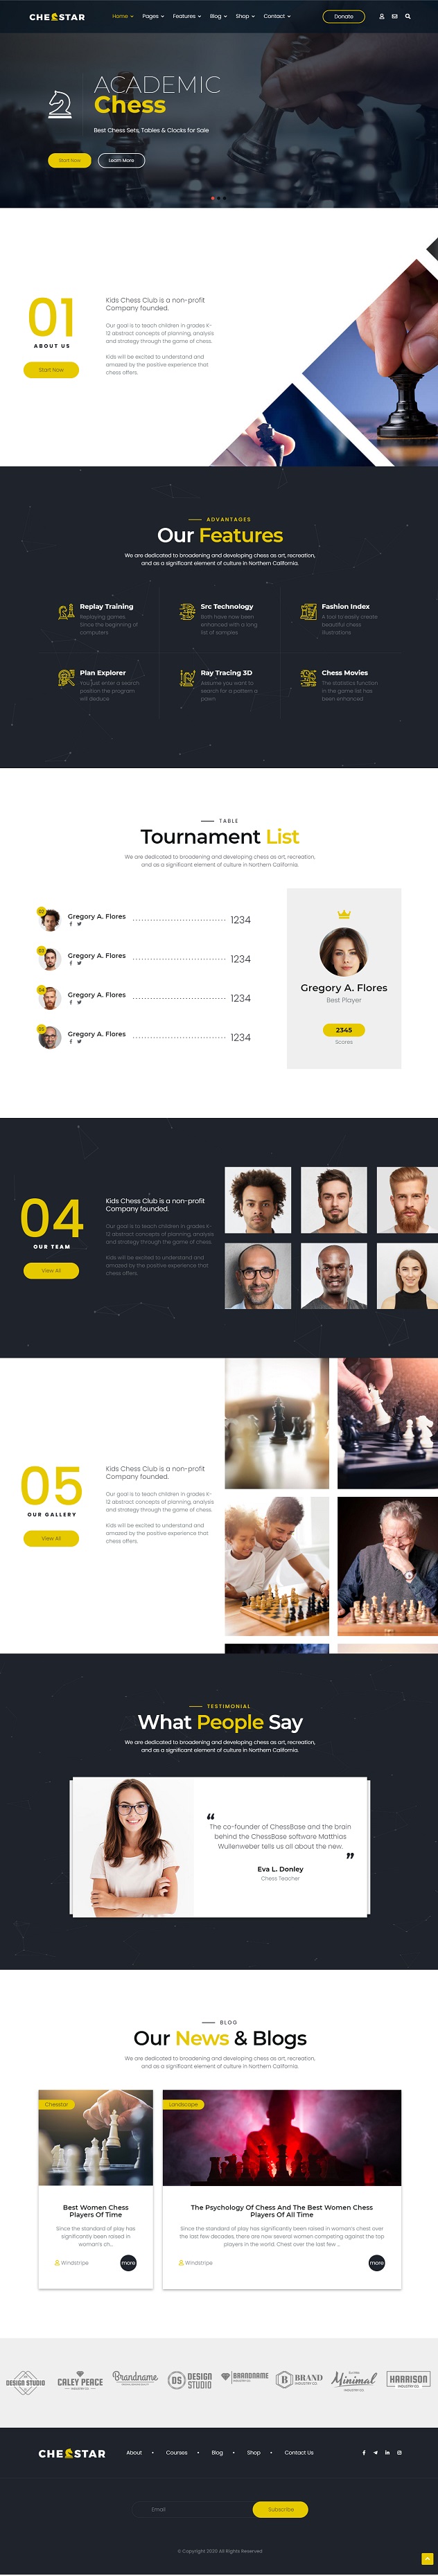 Chesstar - Chess Club and Personal Trainer Joomla Template - 2